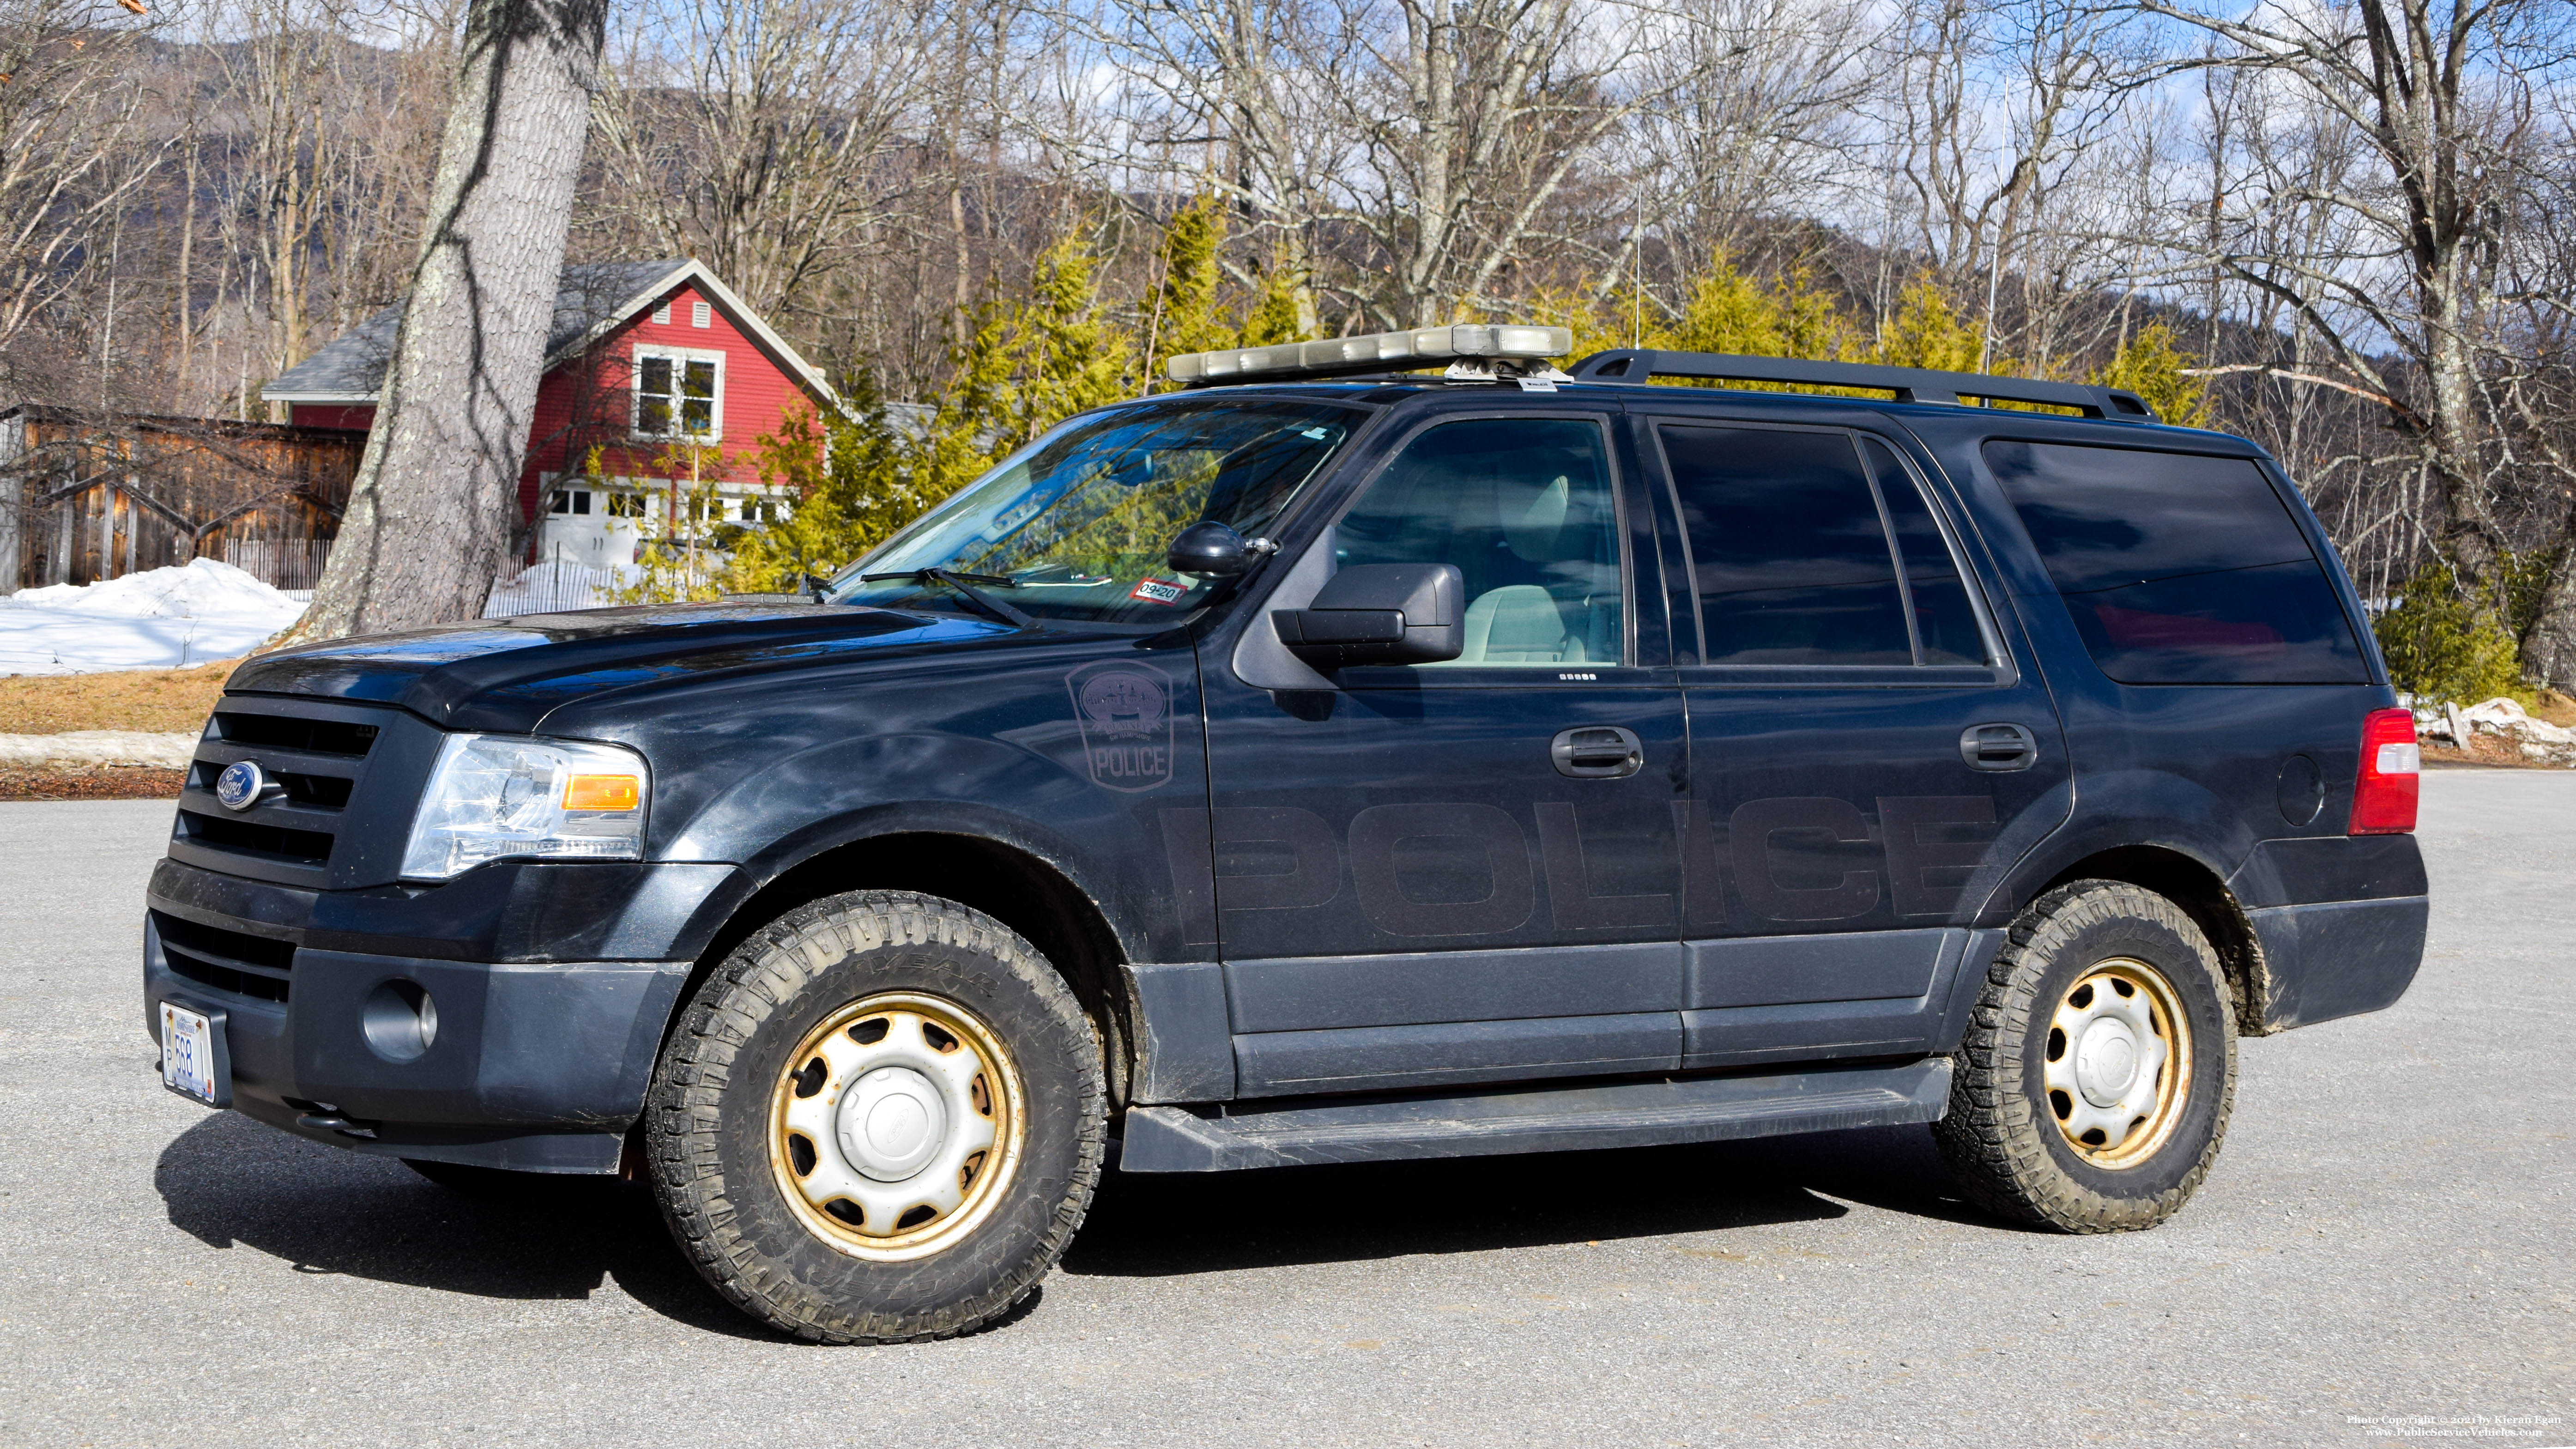 A photo  of Rumney Police
            Car 1, a 2010 Ford Expedition             taken by Kieran Egan